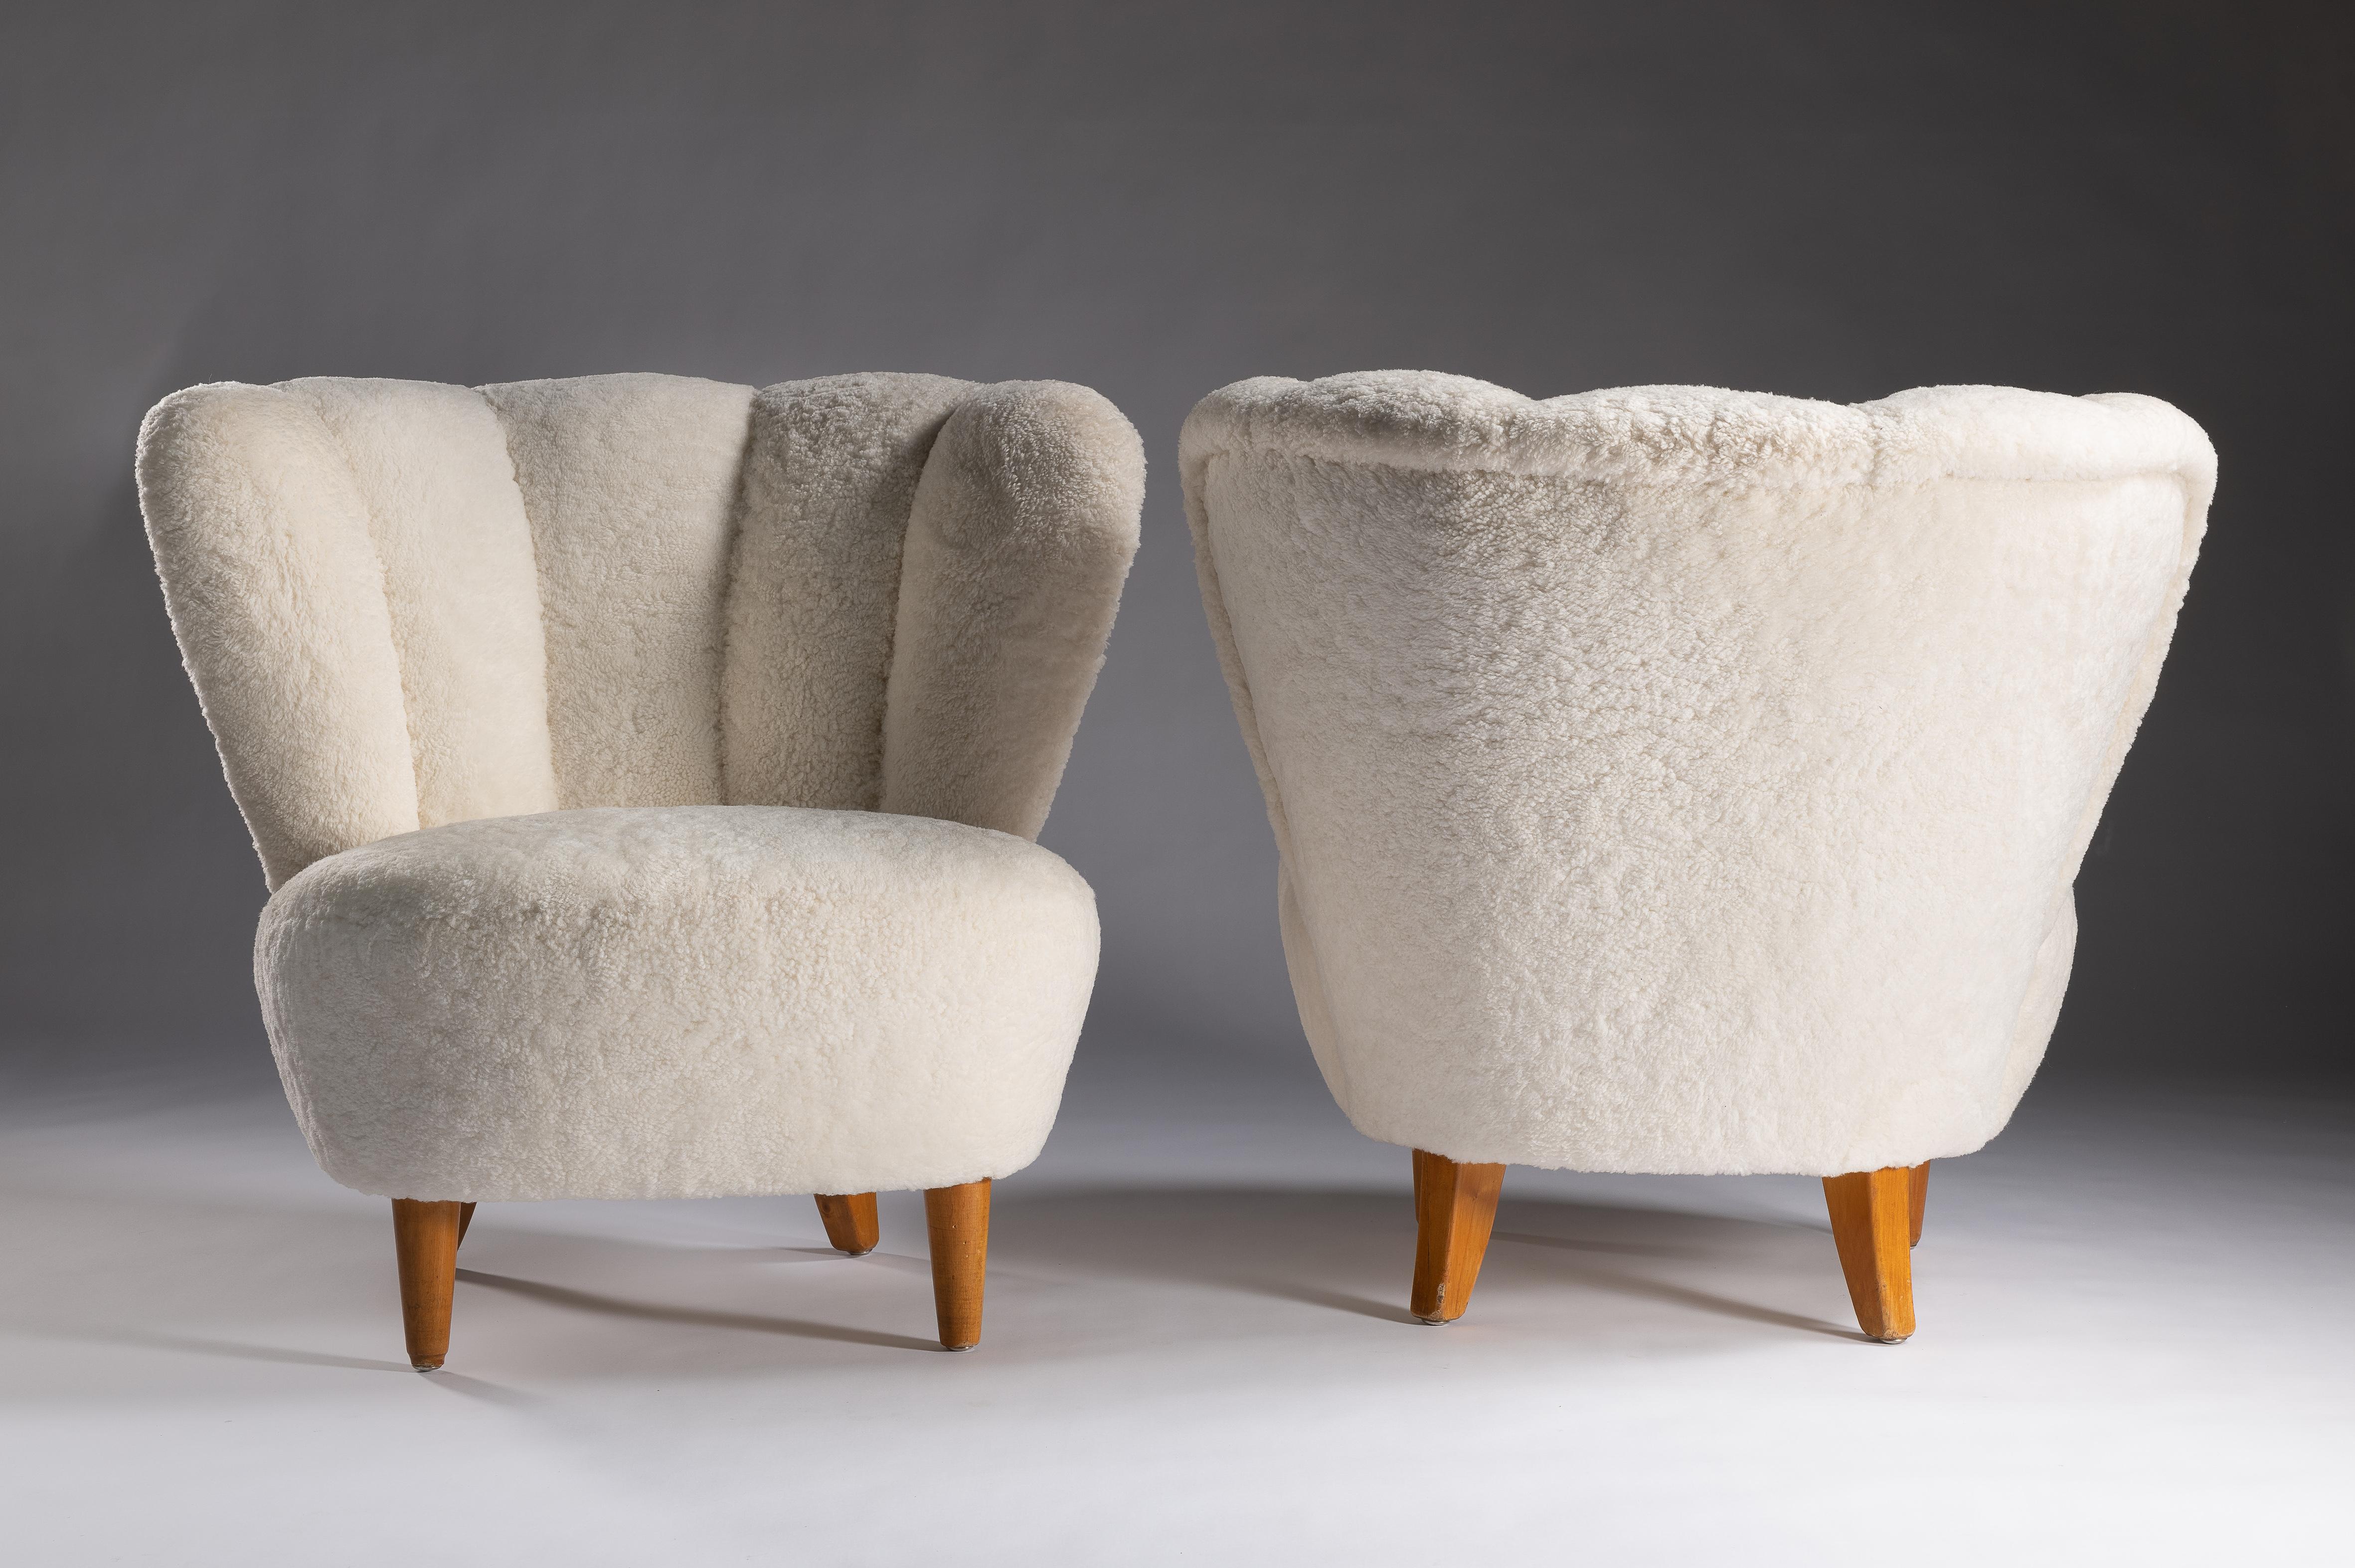 Mid-Century Modern Pair of Scandinavian Vintage White Easy Chairs 1950s, Shearling Upholstery For Sale